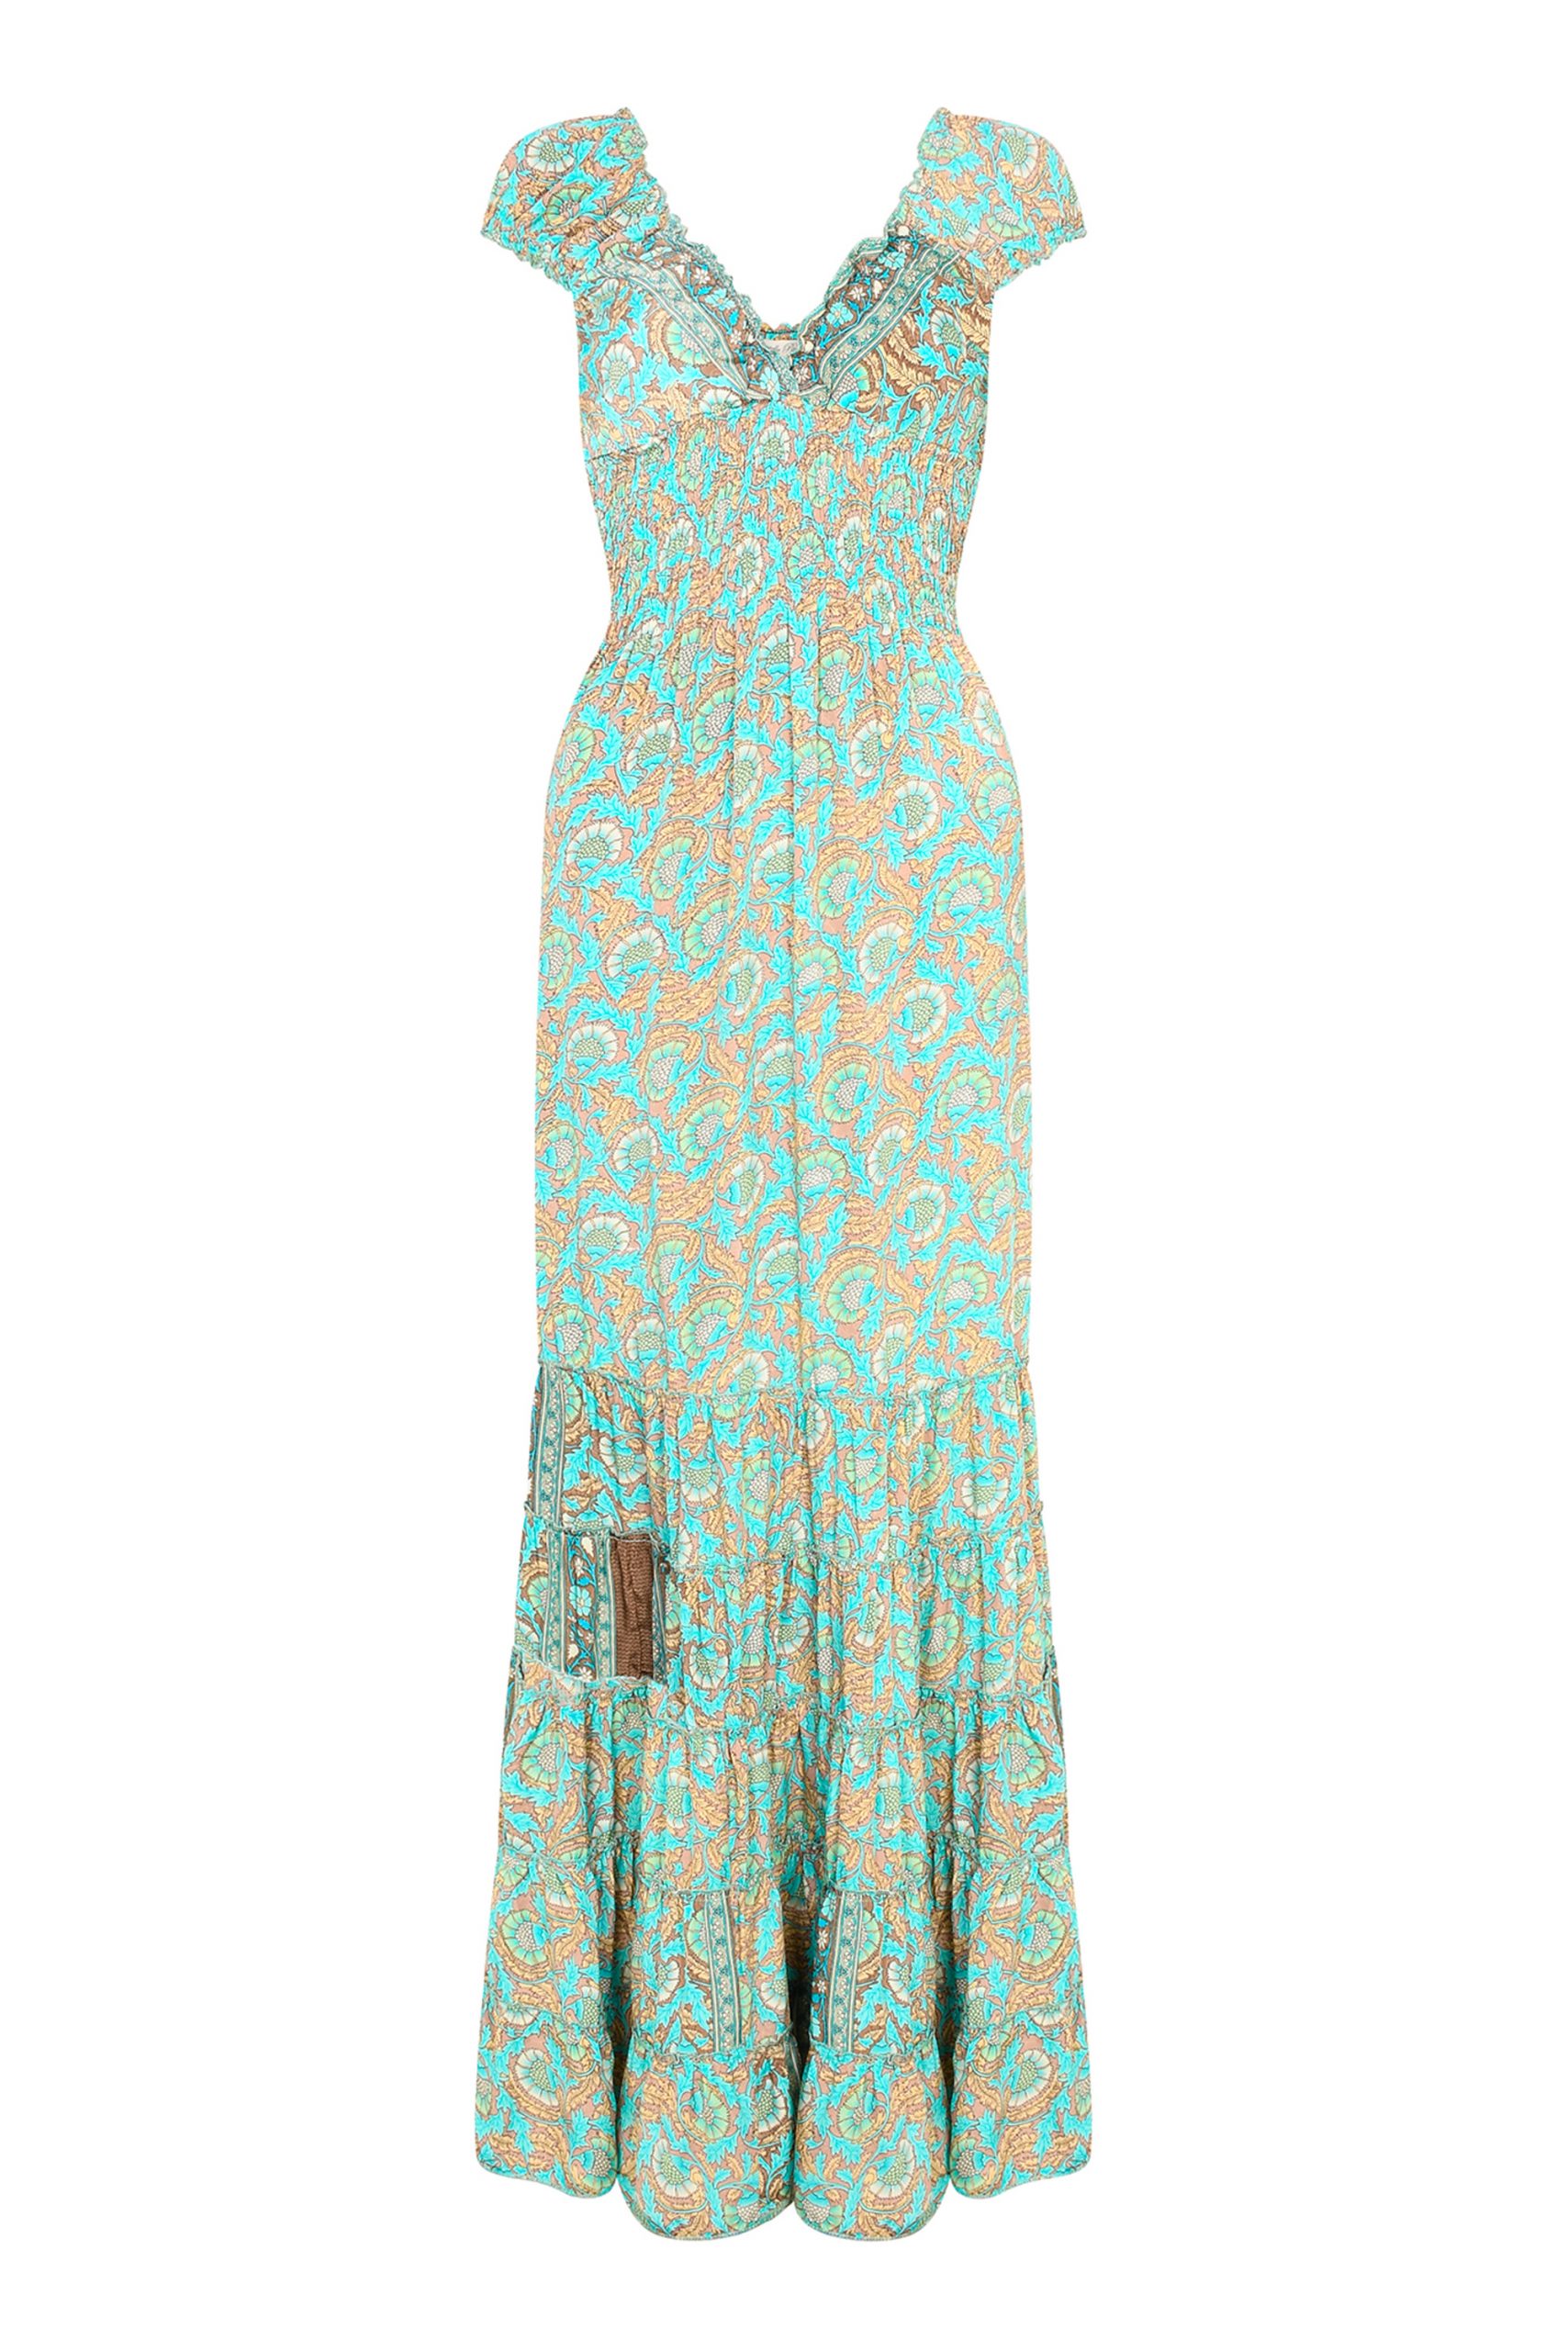 Long Gypsy dress Turquoise thistle – Gabrielle Parker